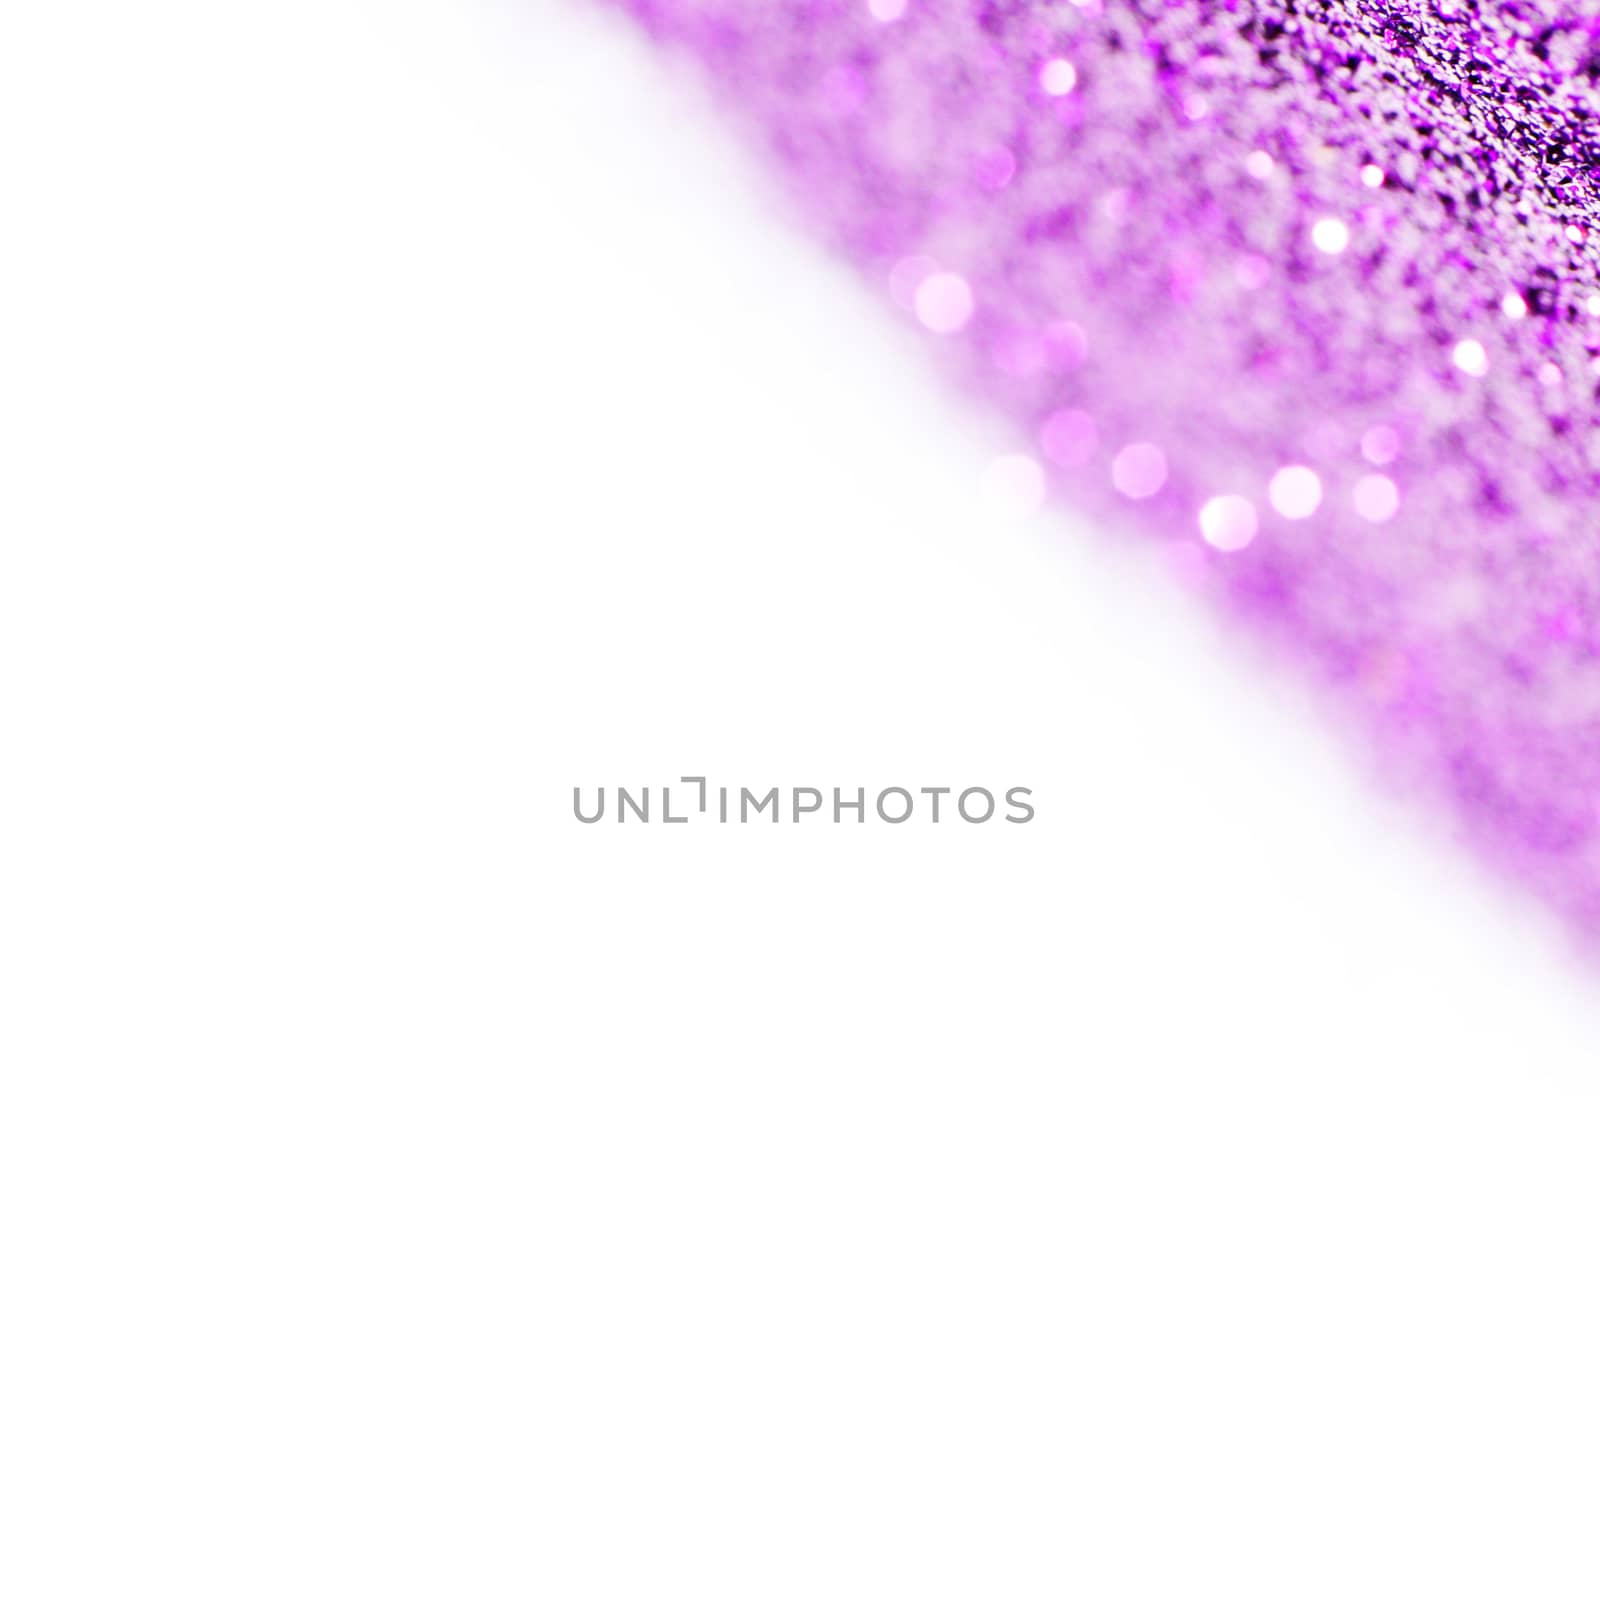 Purple shiny glitter holiday background with white copy space